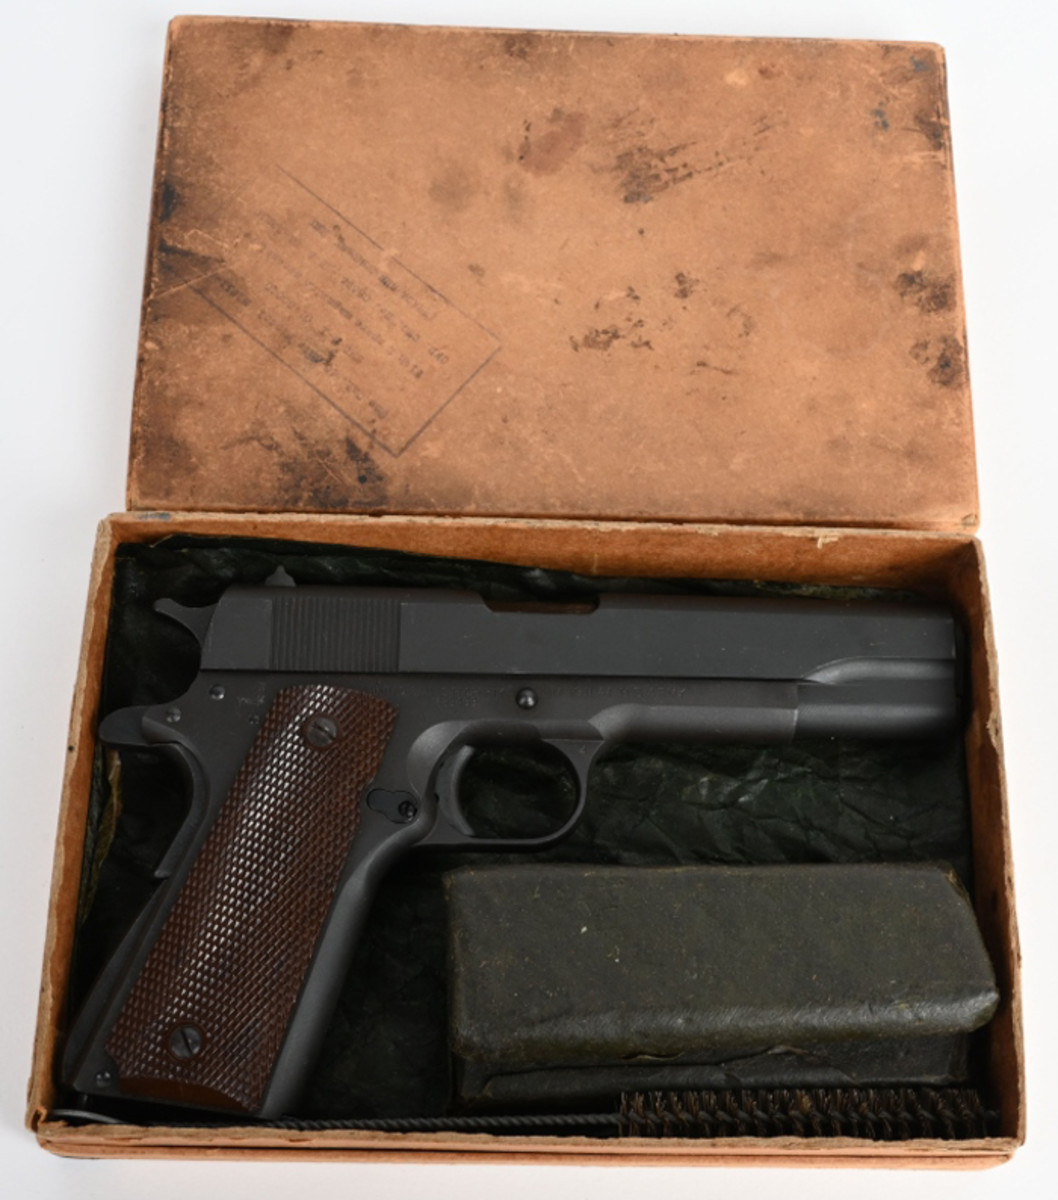 Pristine Ithaca 1911-A1 .45-acp pistol manufactured in 1943. Absolutely new condition and possibly unfired. Original box.